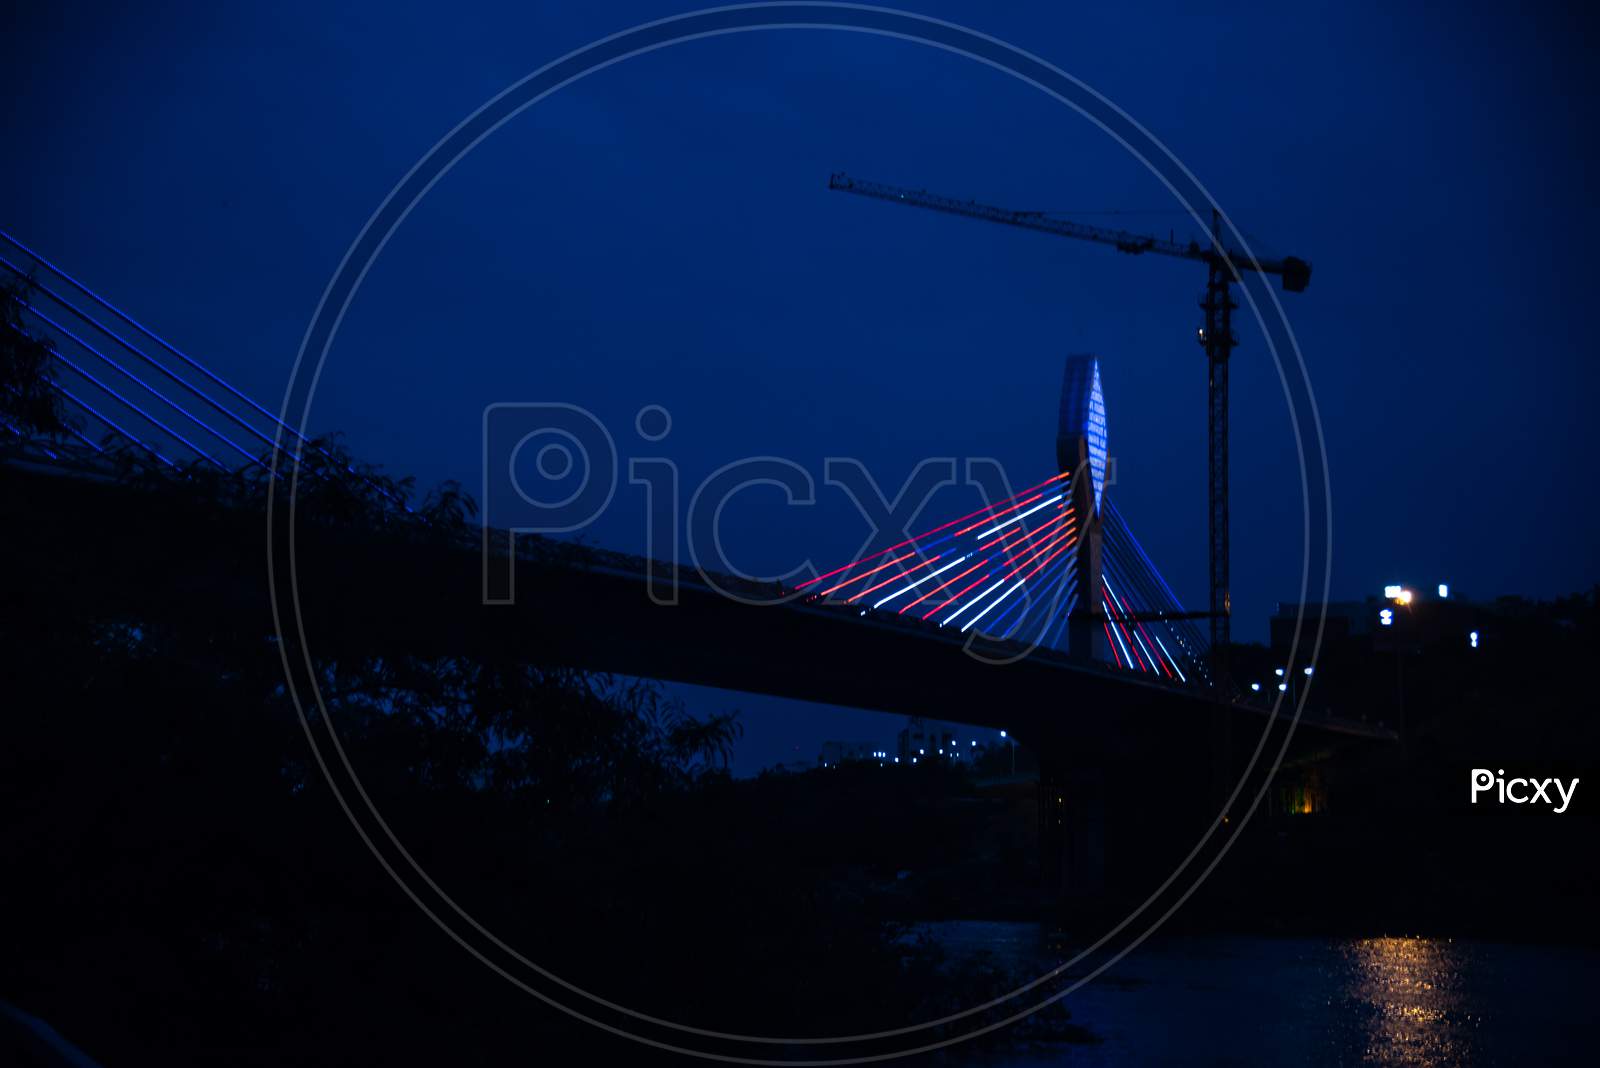 Durgam Cheruvu Cable Bridge getting final touches as the bridge is set to be open for Public use in a few days, August 14, 2020, Hyderabad